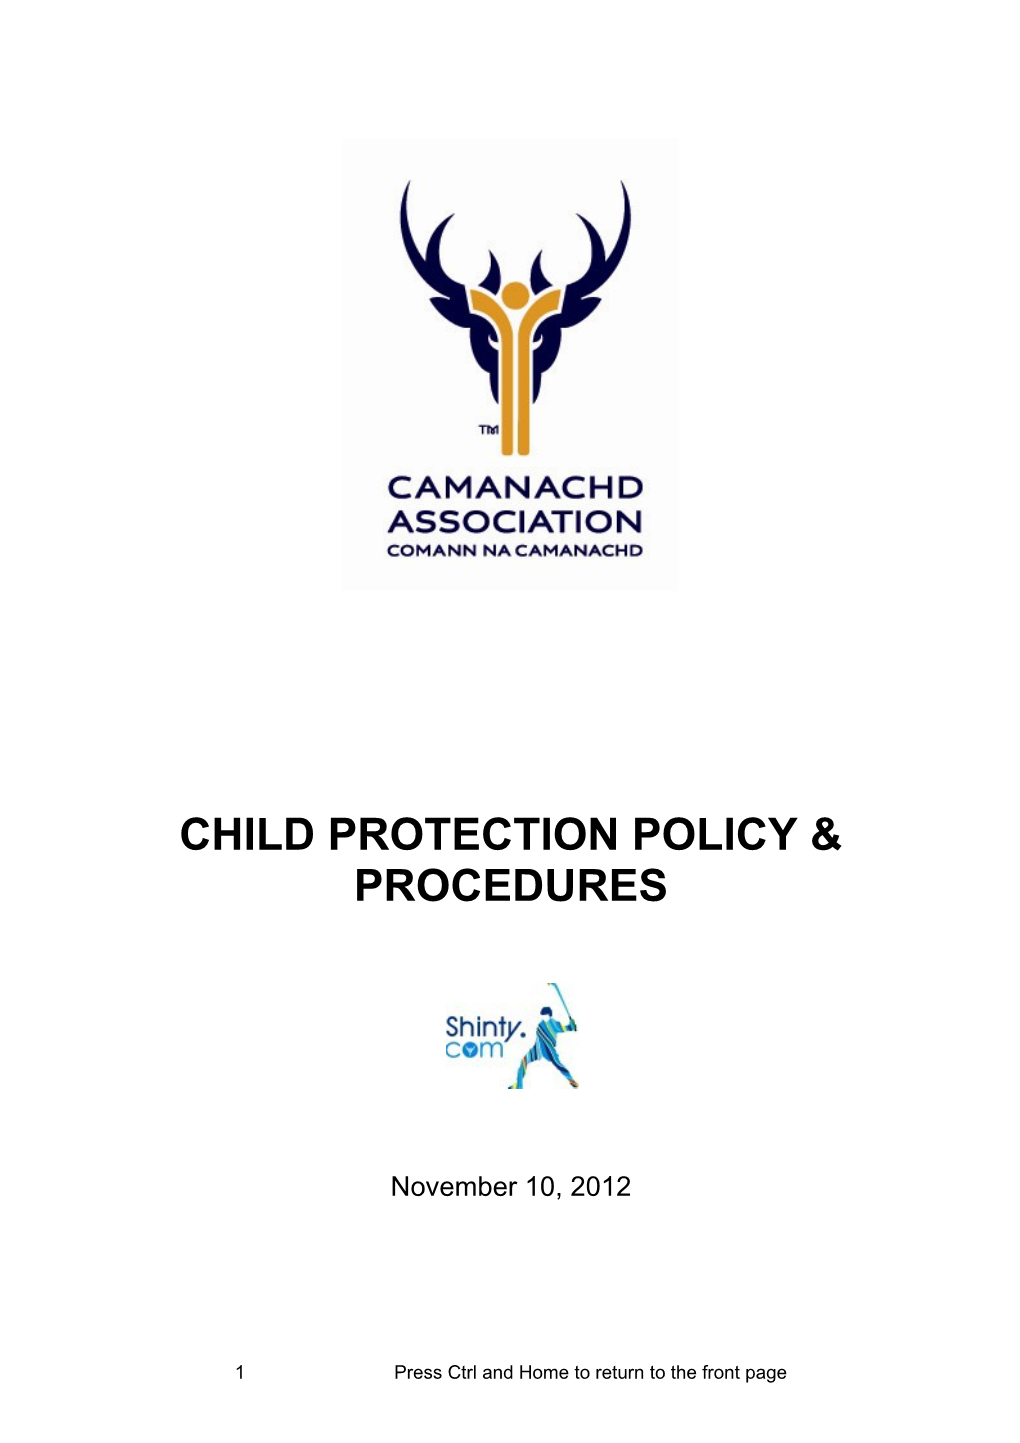 Child Protection Policy & Procedures